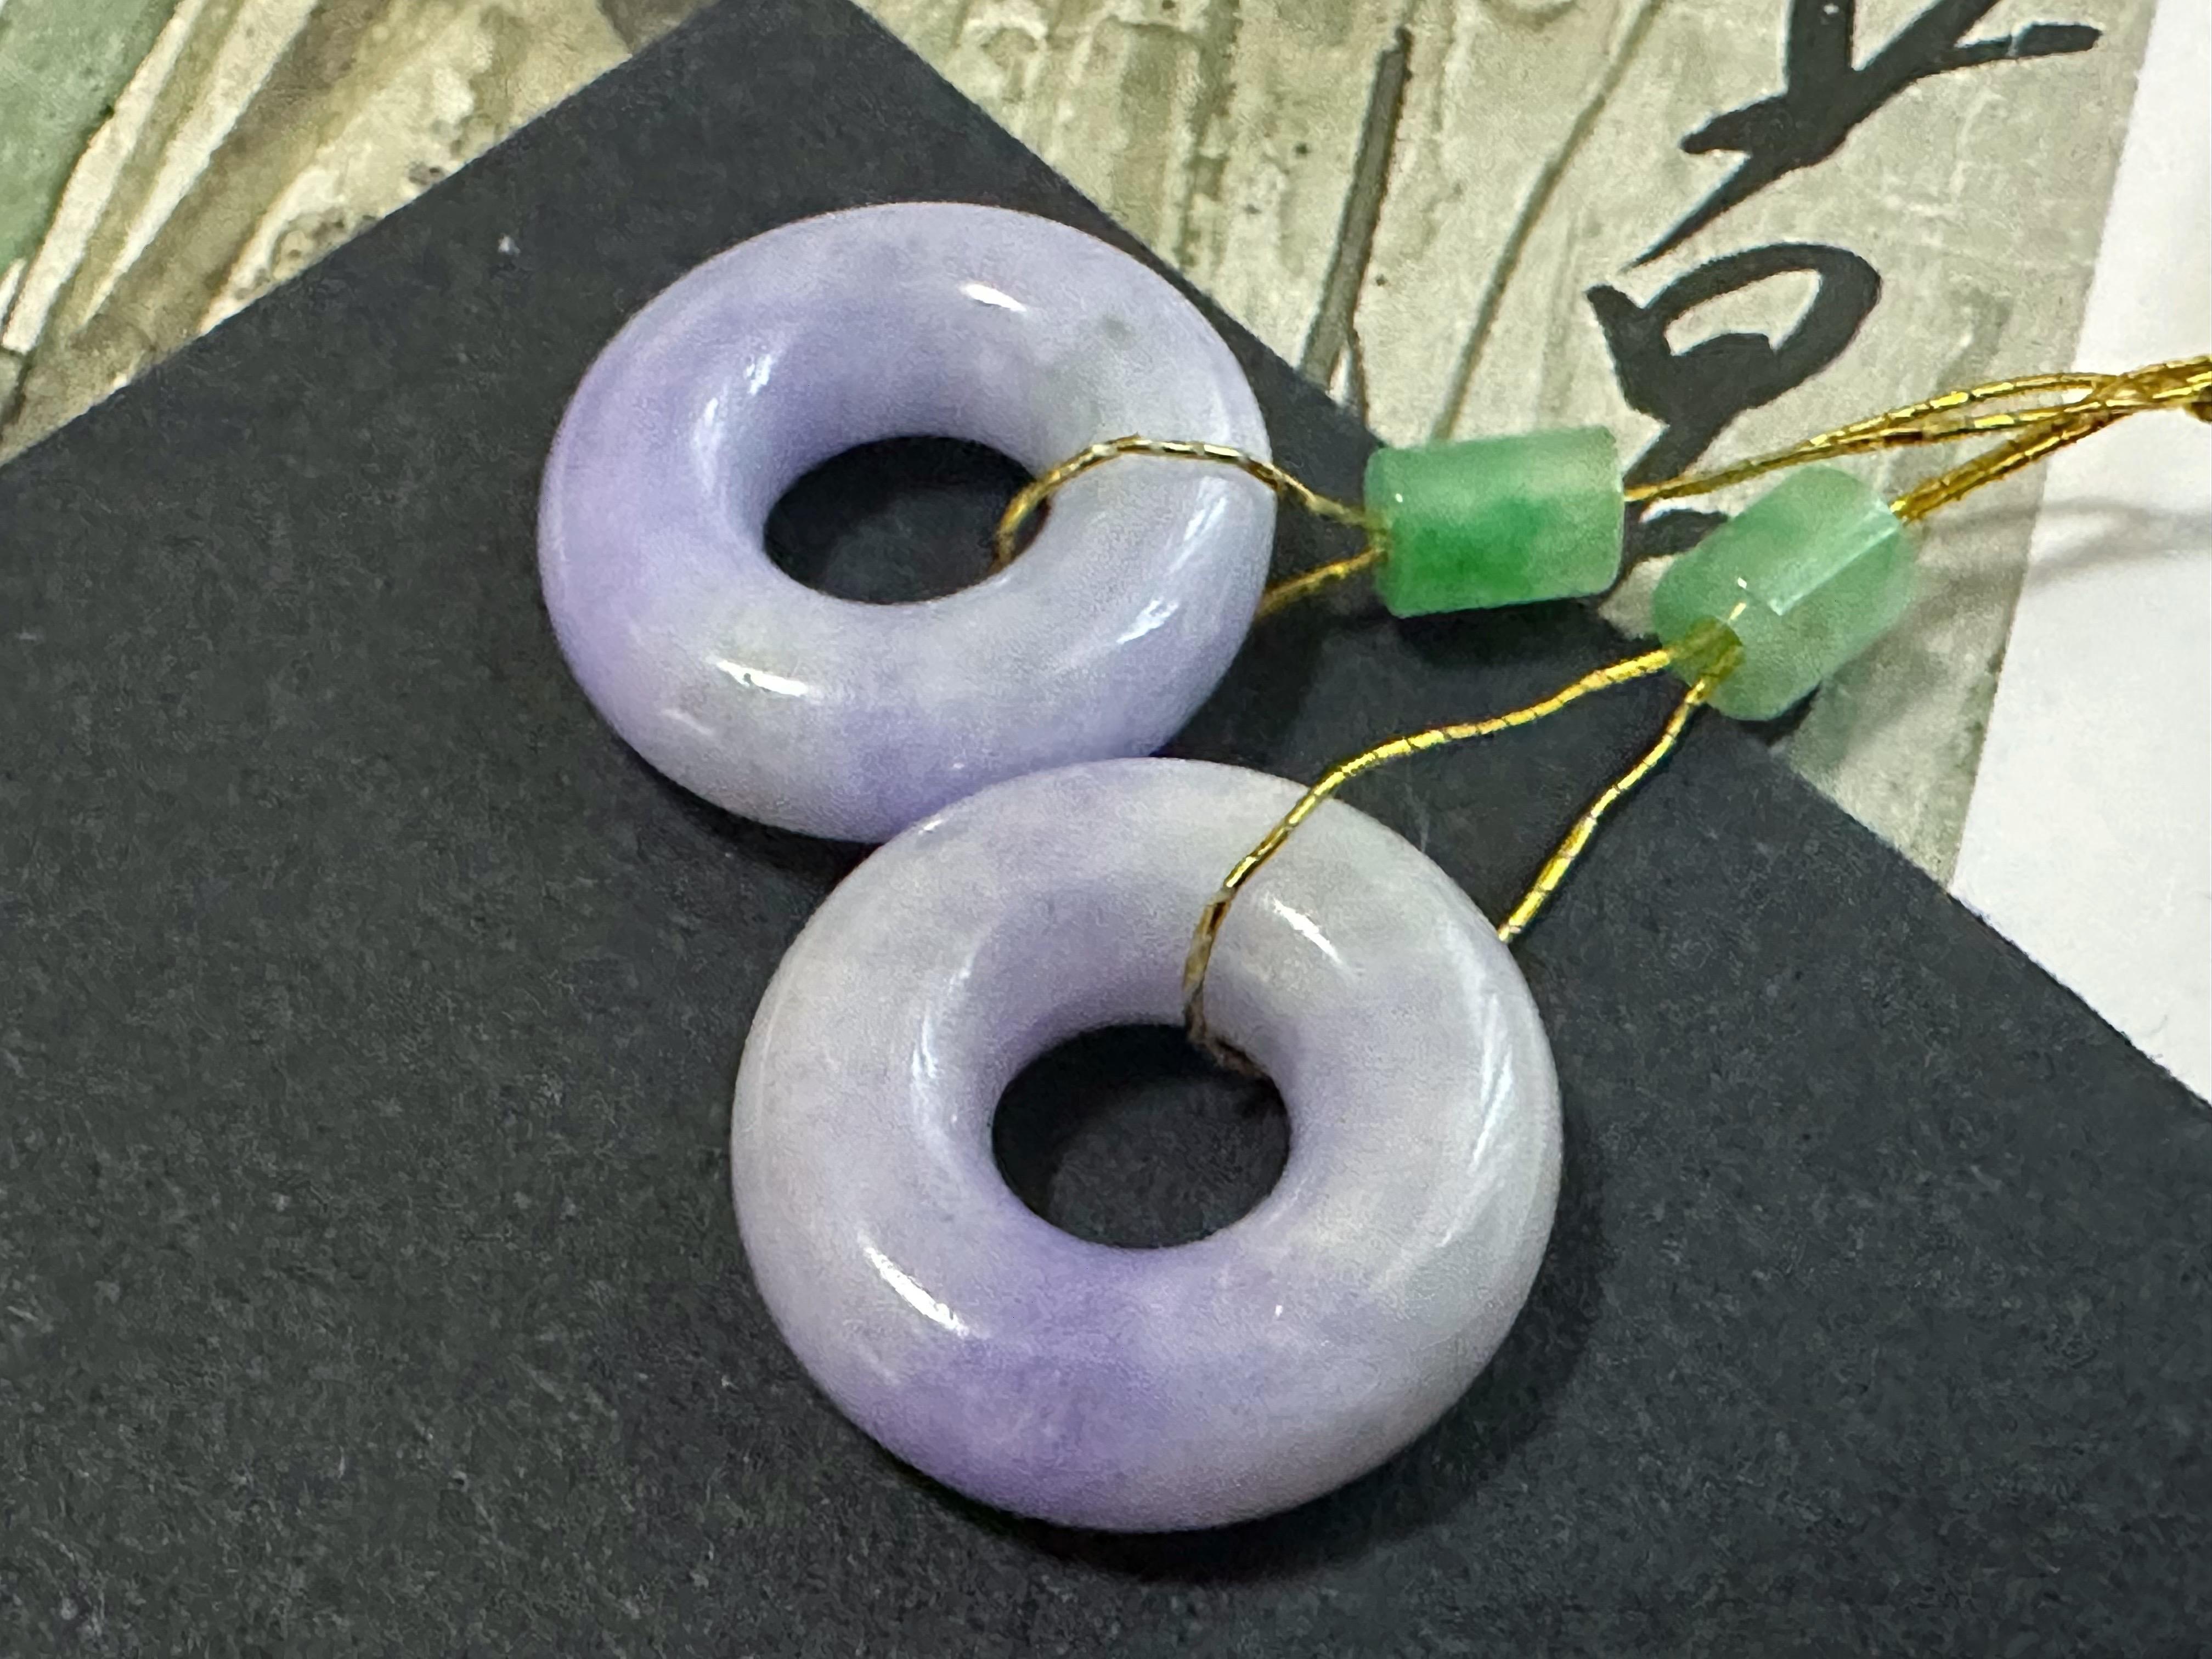 Introducing our exquisite pair of 100% natural, untreated, and undyed Type-A Myanmar jadeite jade donuts. These stunning lavender jade gemstones are perfect for creating exceptional jewelry pieces, especially earrings.

Crafted from Type-A natural